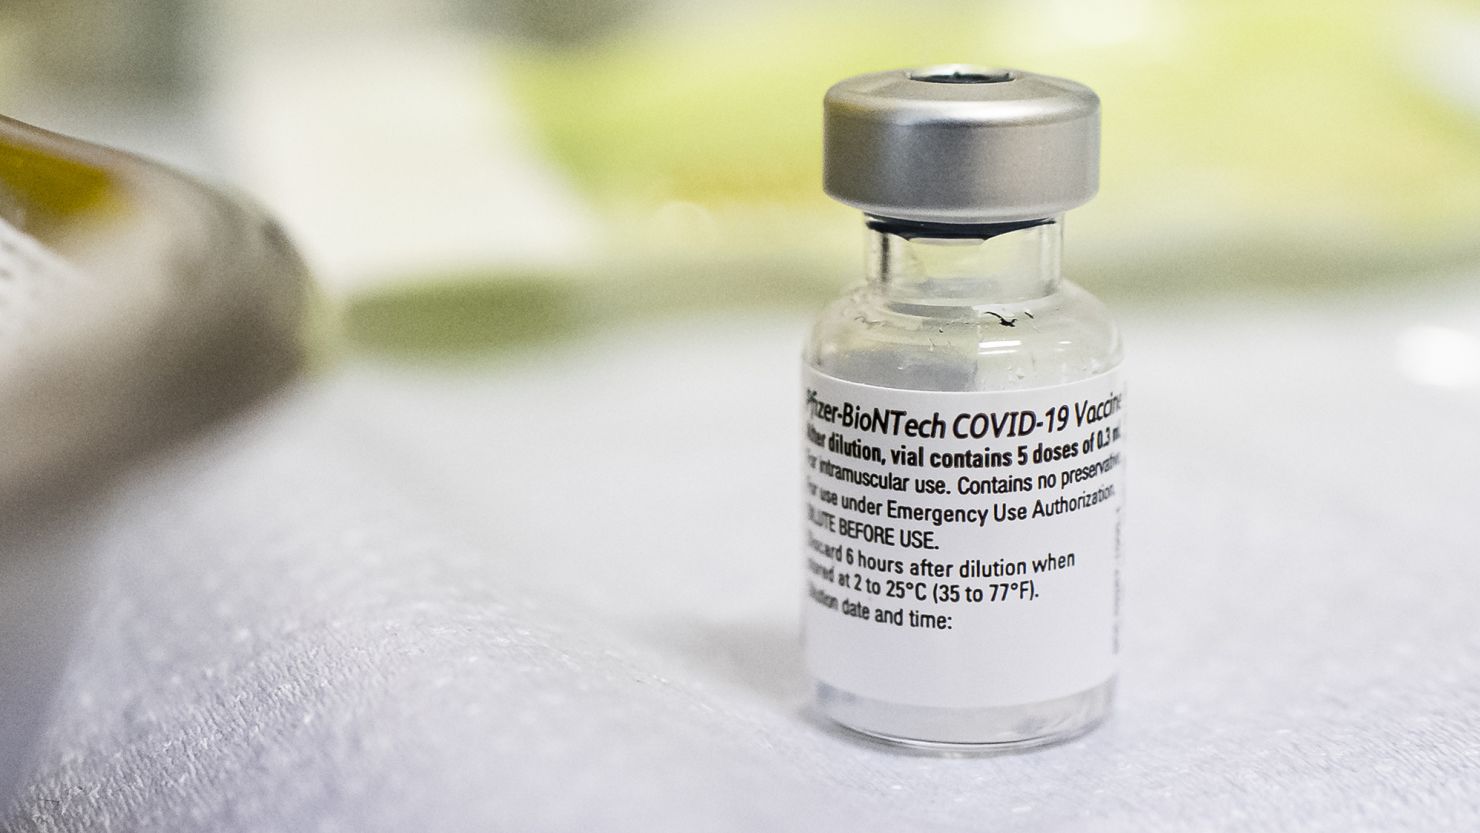 The BioNTech vaccine, developed with US drugmaker Pfizer, was approved for emergency use by the World Health Organization in December.